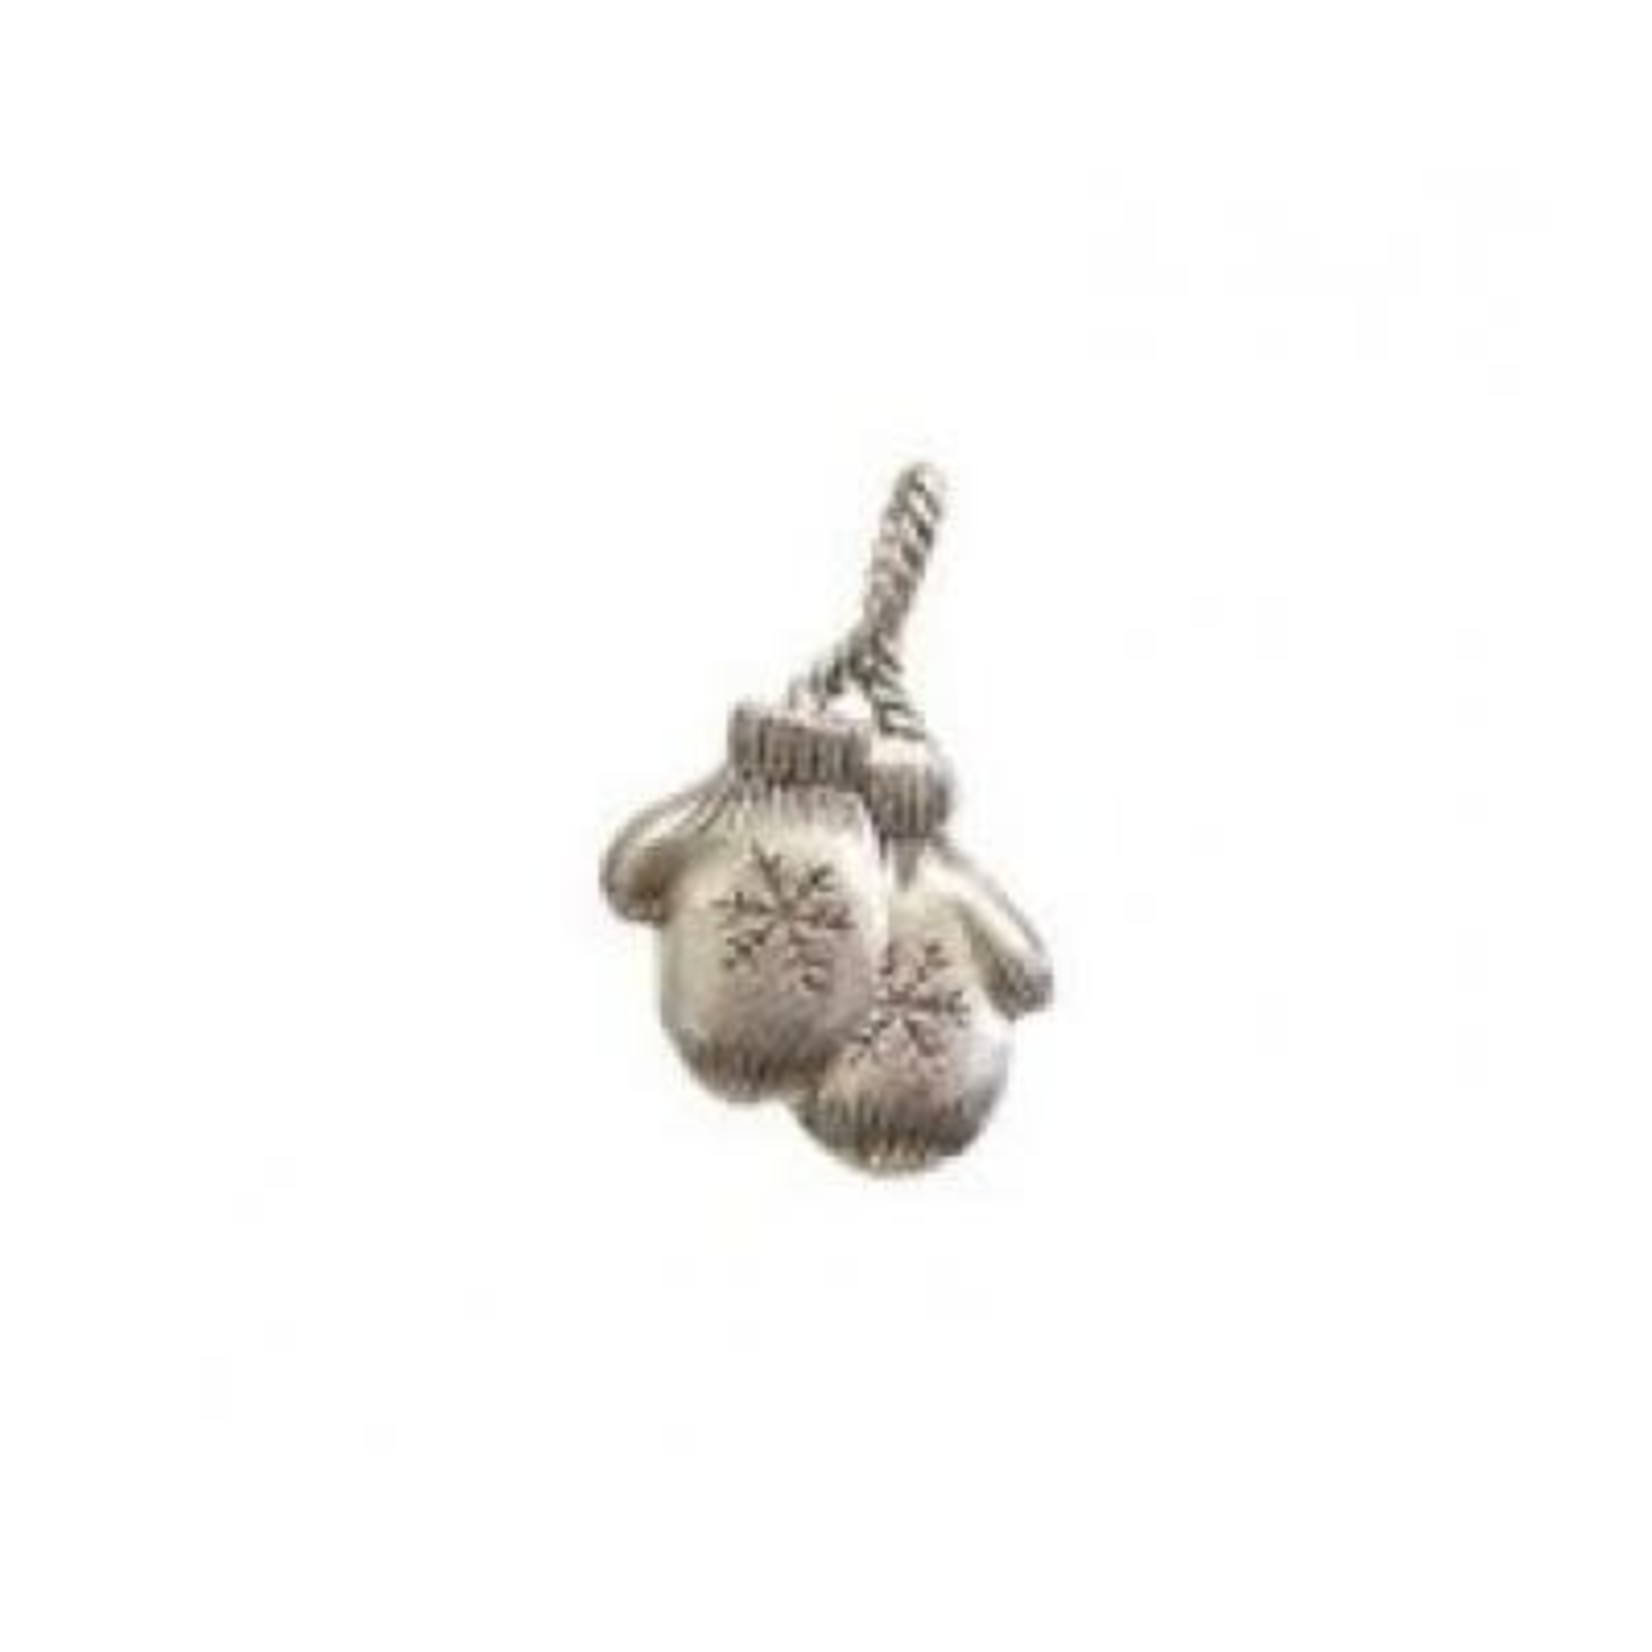 Mittens Pewter Charm